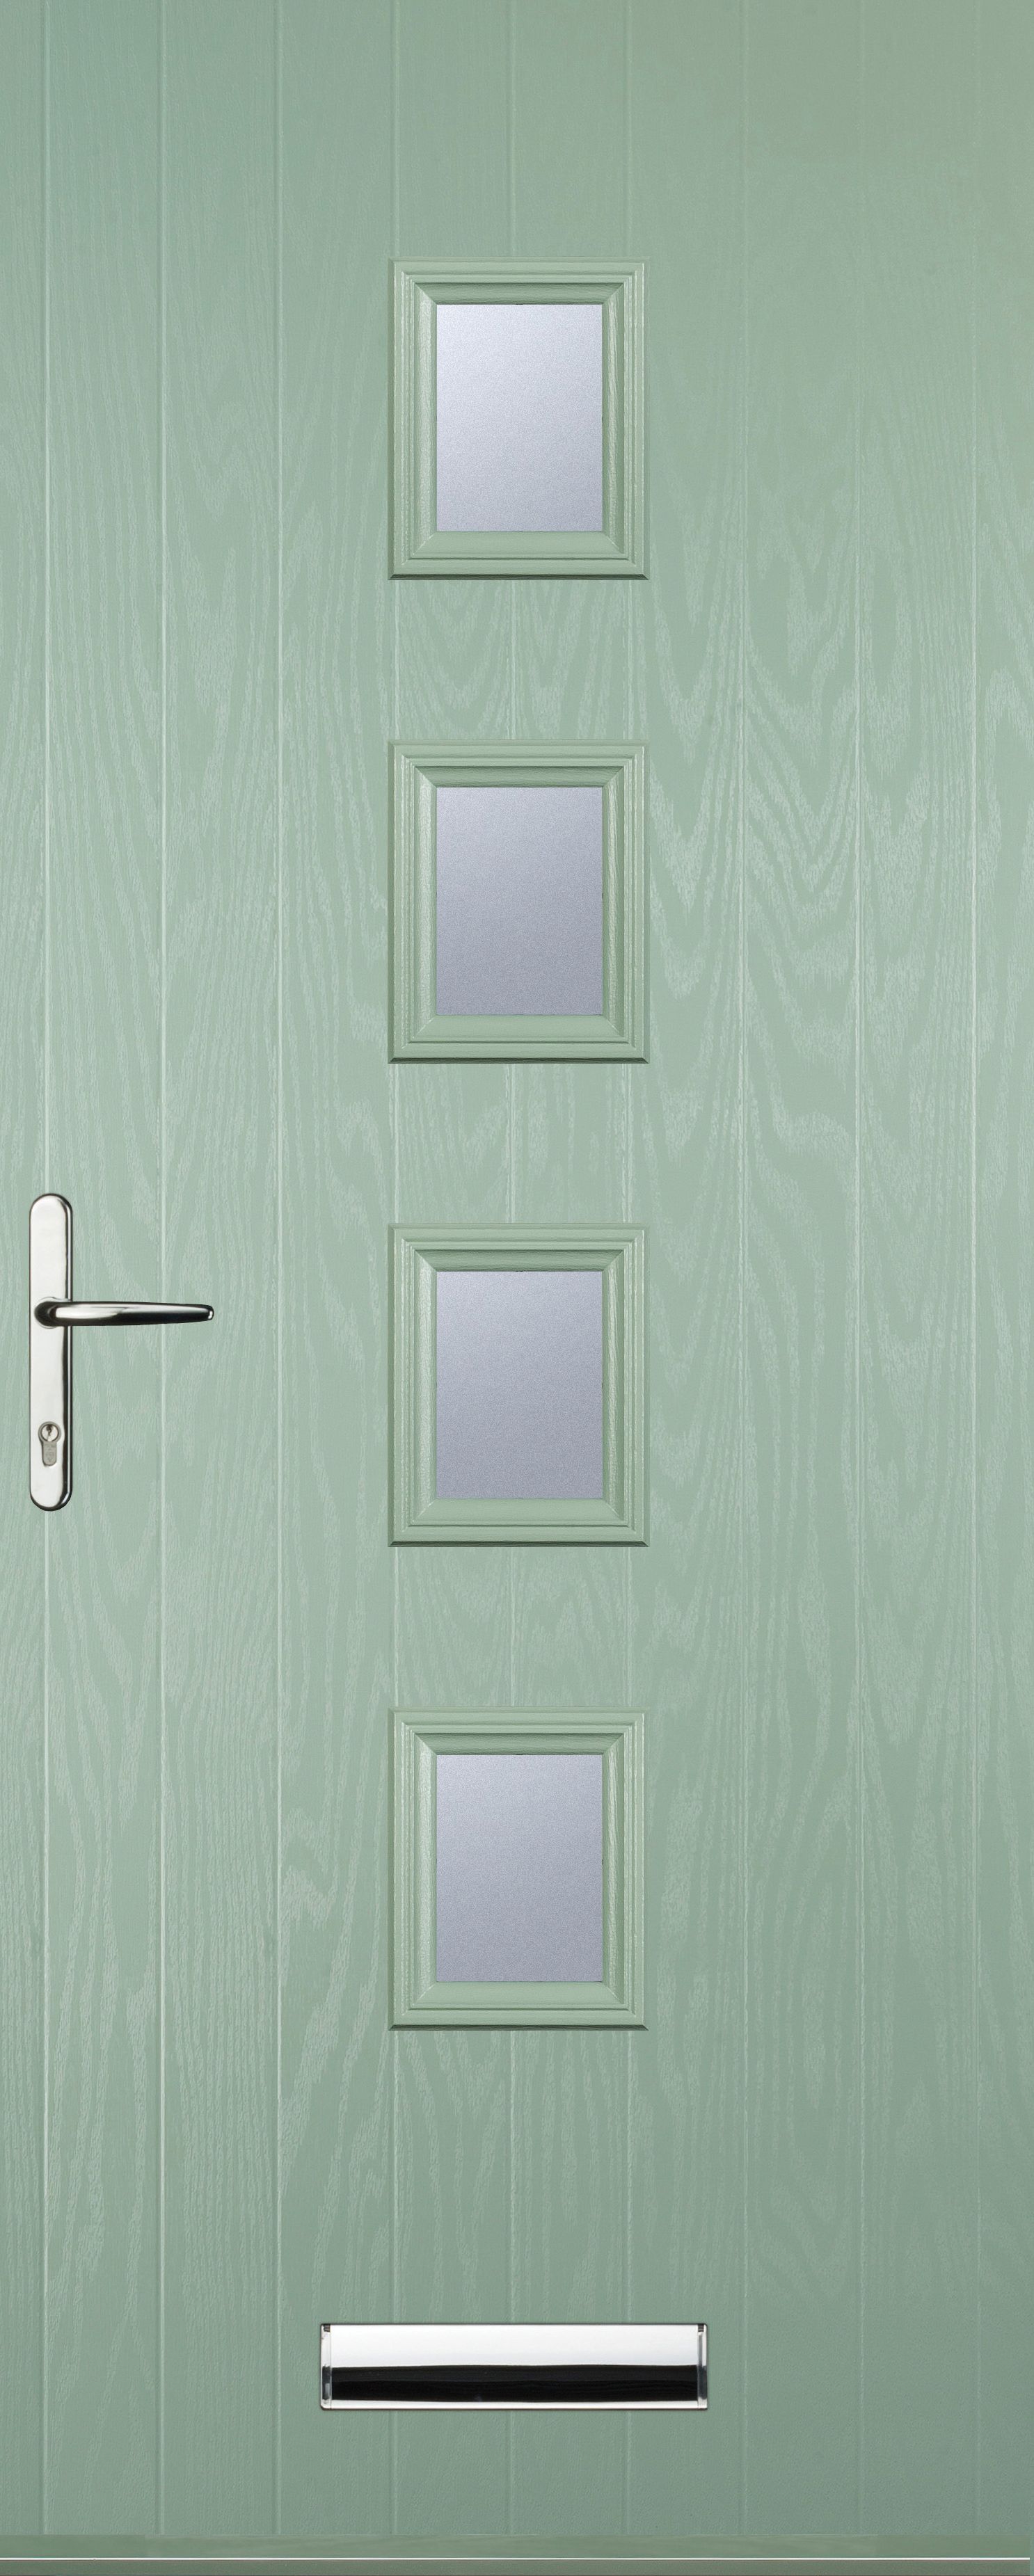 Image of Euramax 4 Square Right Hand Chartwell Green Composite Door - 840 x 2100mm